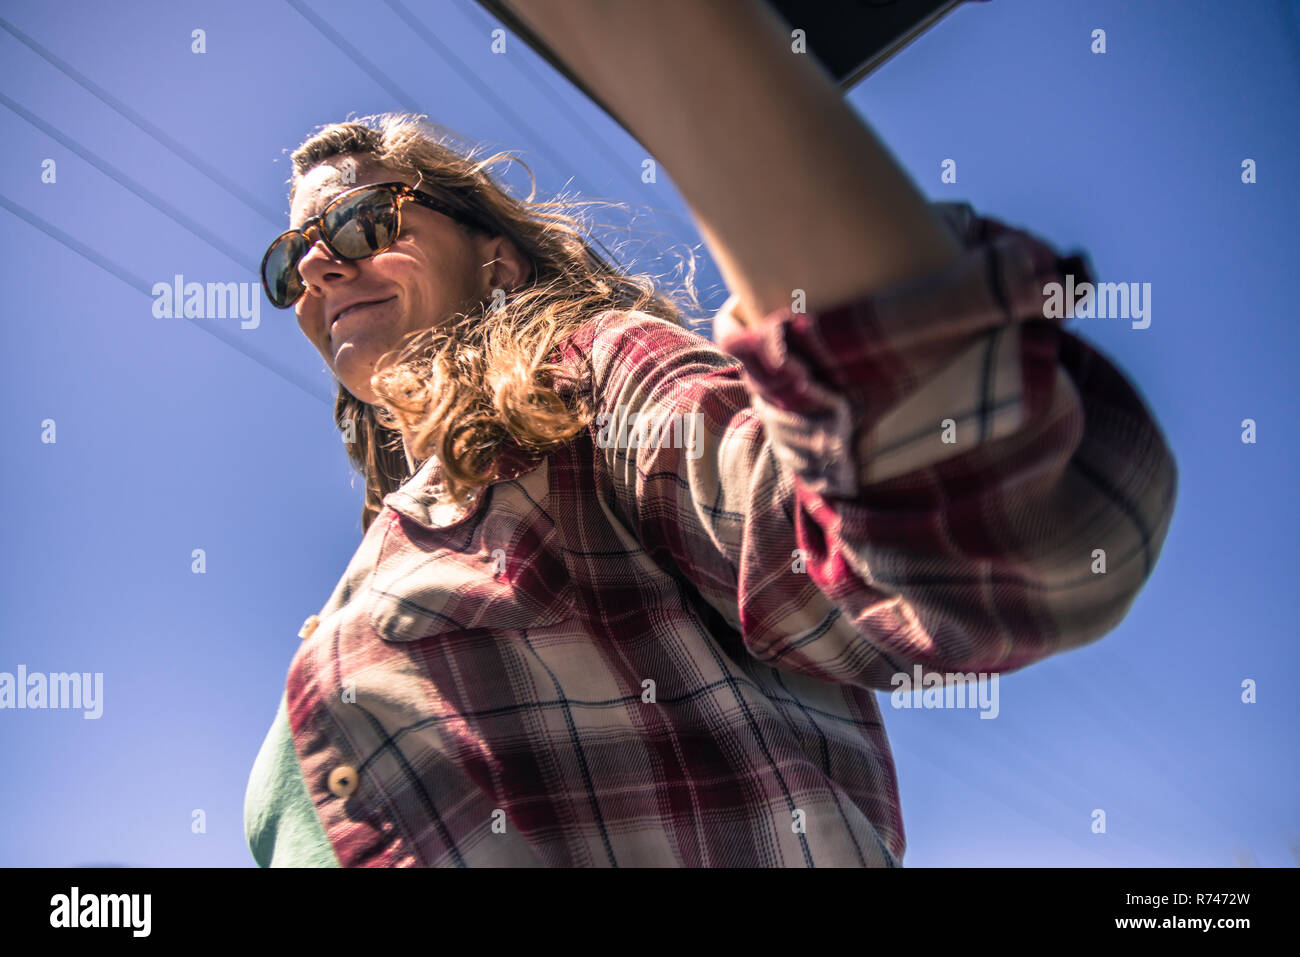 Young woman in sunglasses against blue sky, low angle view Stock Photo